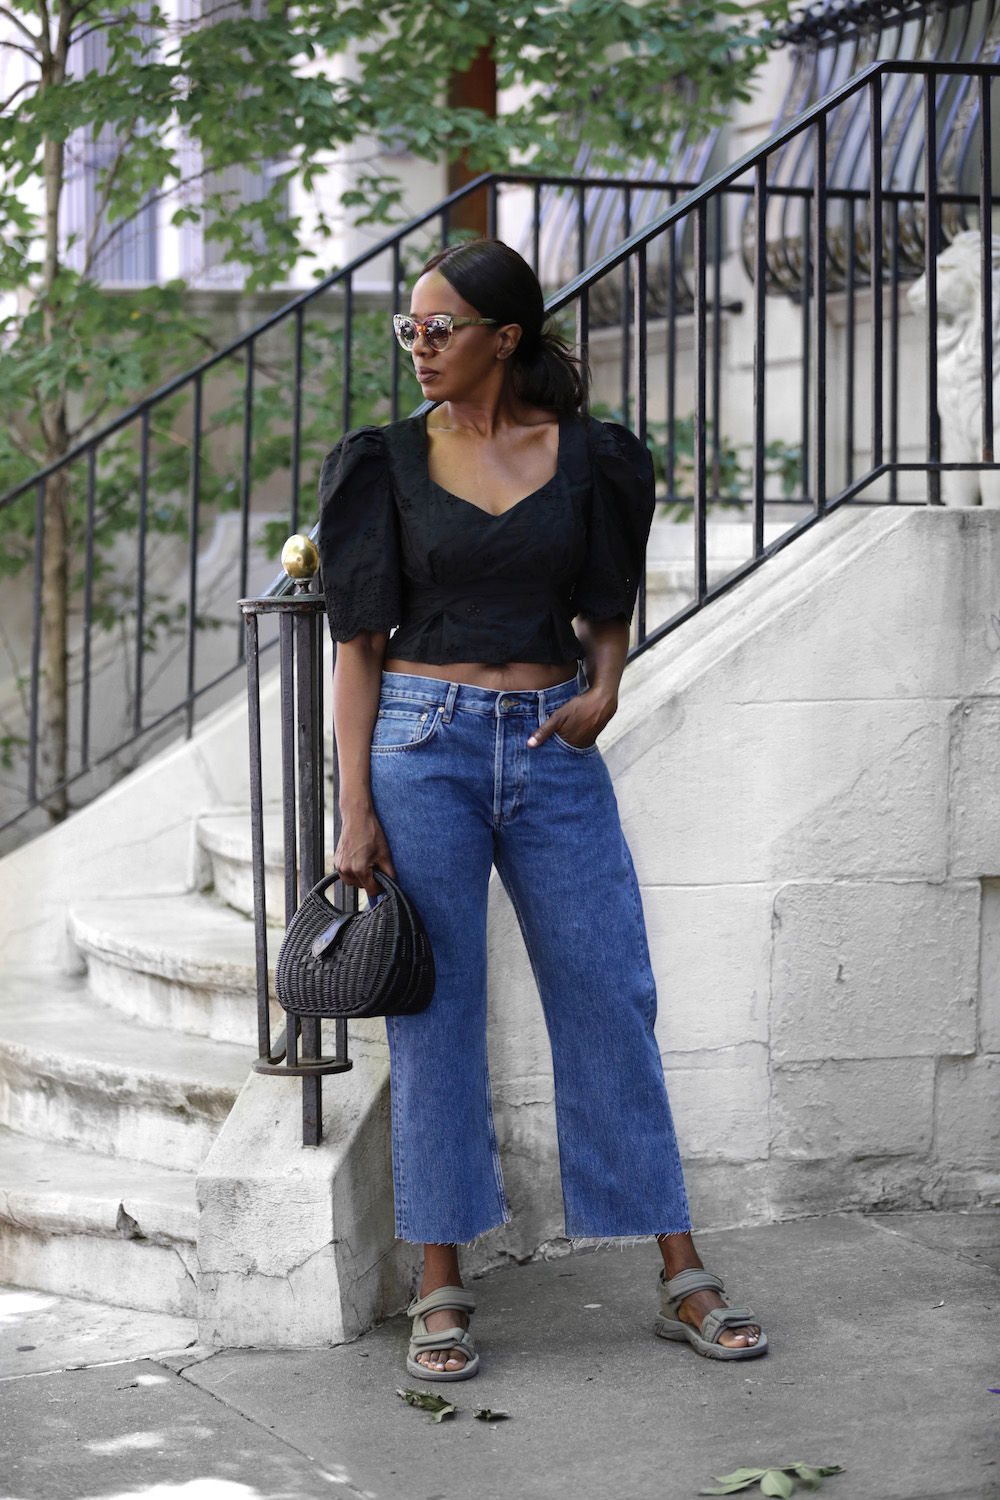 summer outfit, black smocked top, black top and jeans